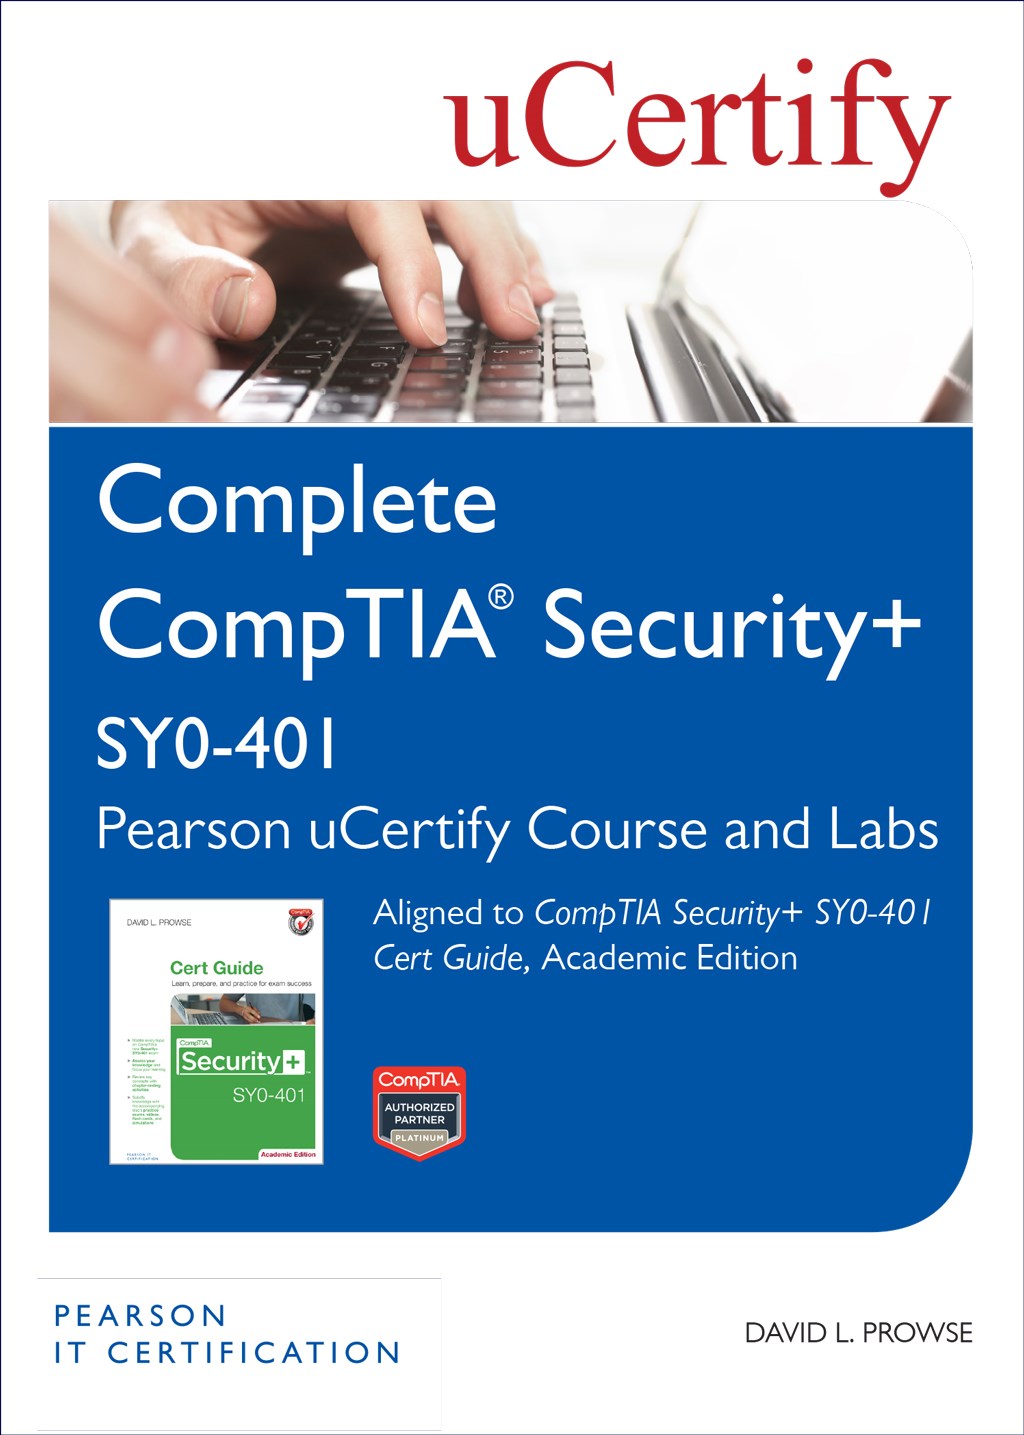 CompTIA Security+ SY0-401 Pearson uCertify Course and Labs